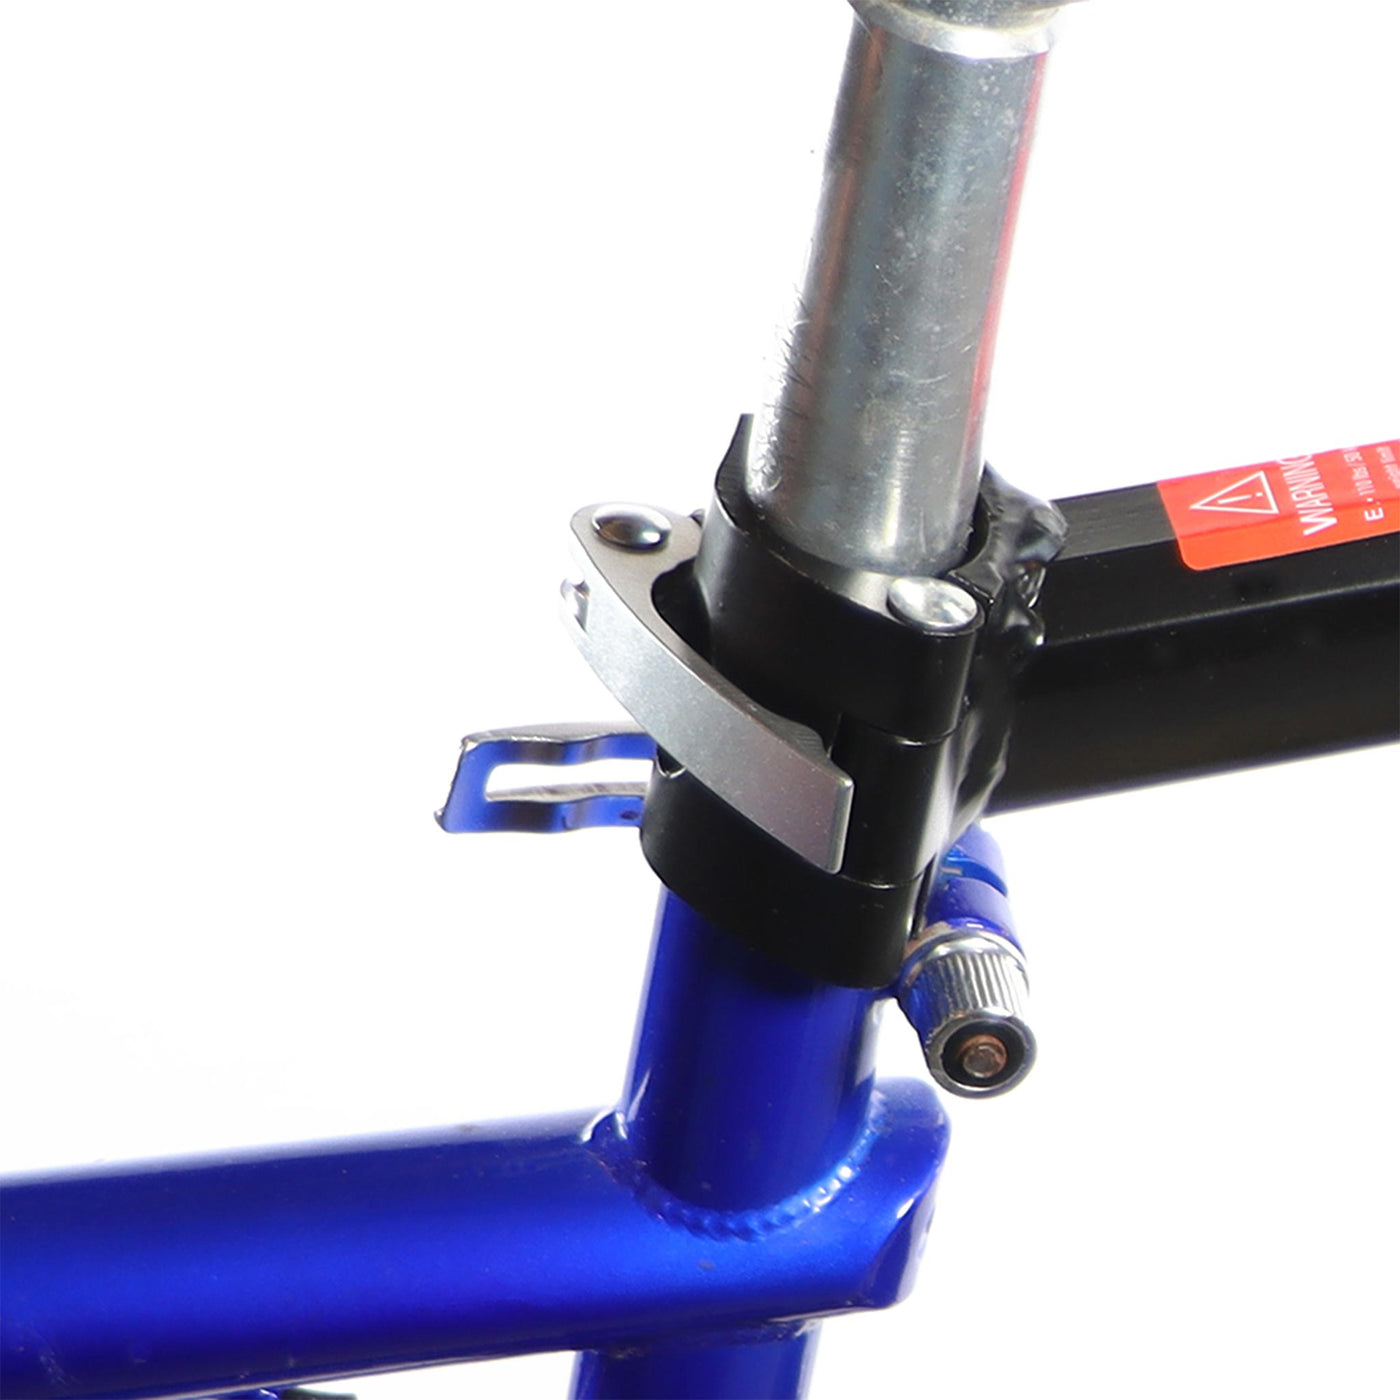 REAR BIKE RACK WITH QUICK RELEASE CLAMPS